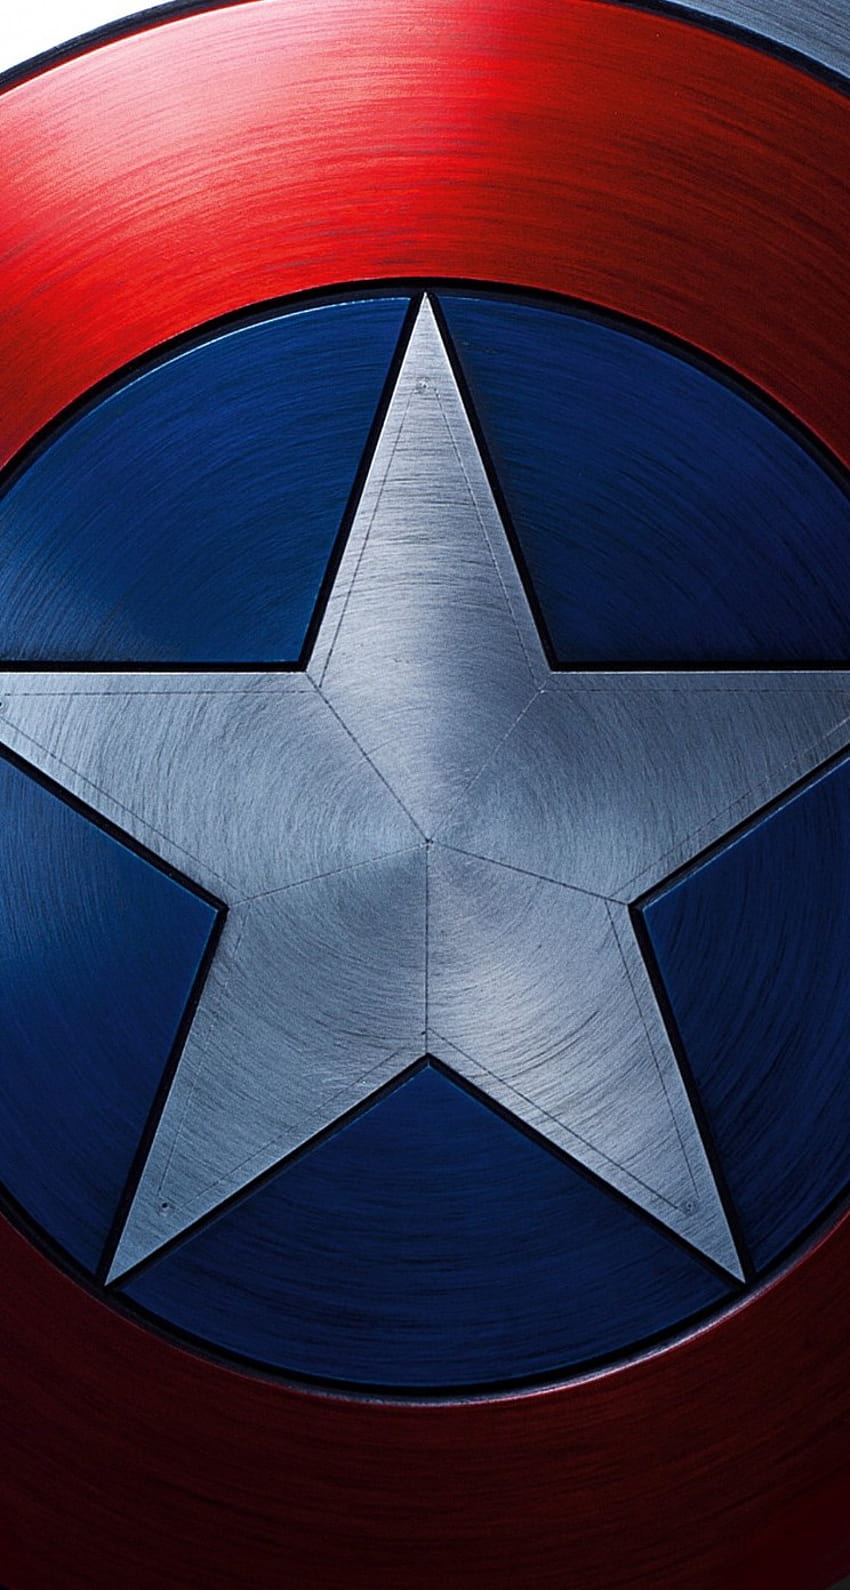 Captain America: Civil War for iPhone 5 / 5s / 5c, falcon and the winter soldier shield HD phone wallpaper